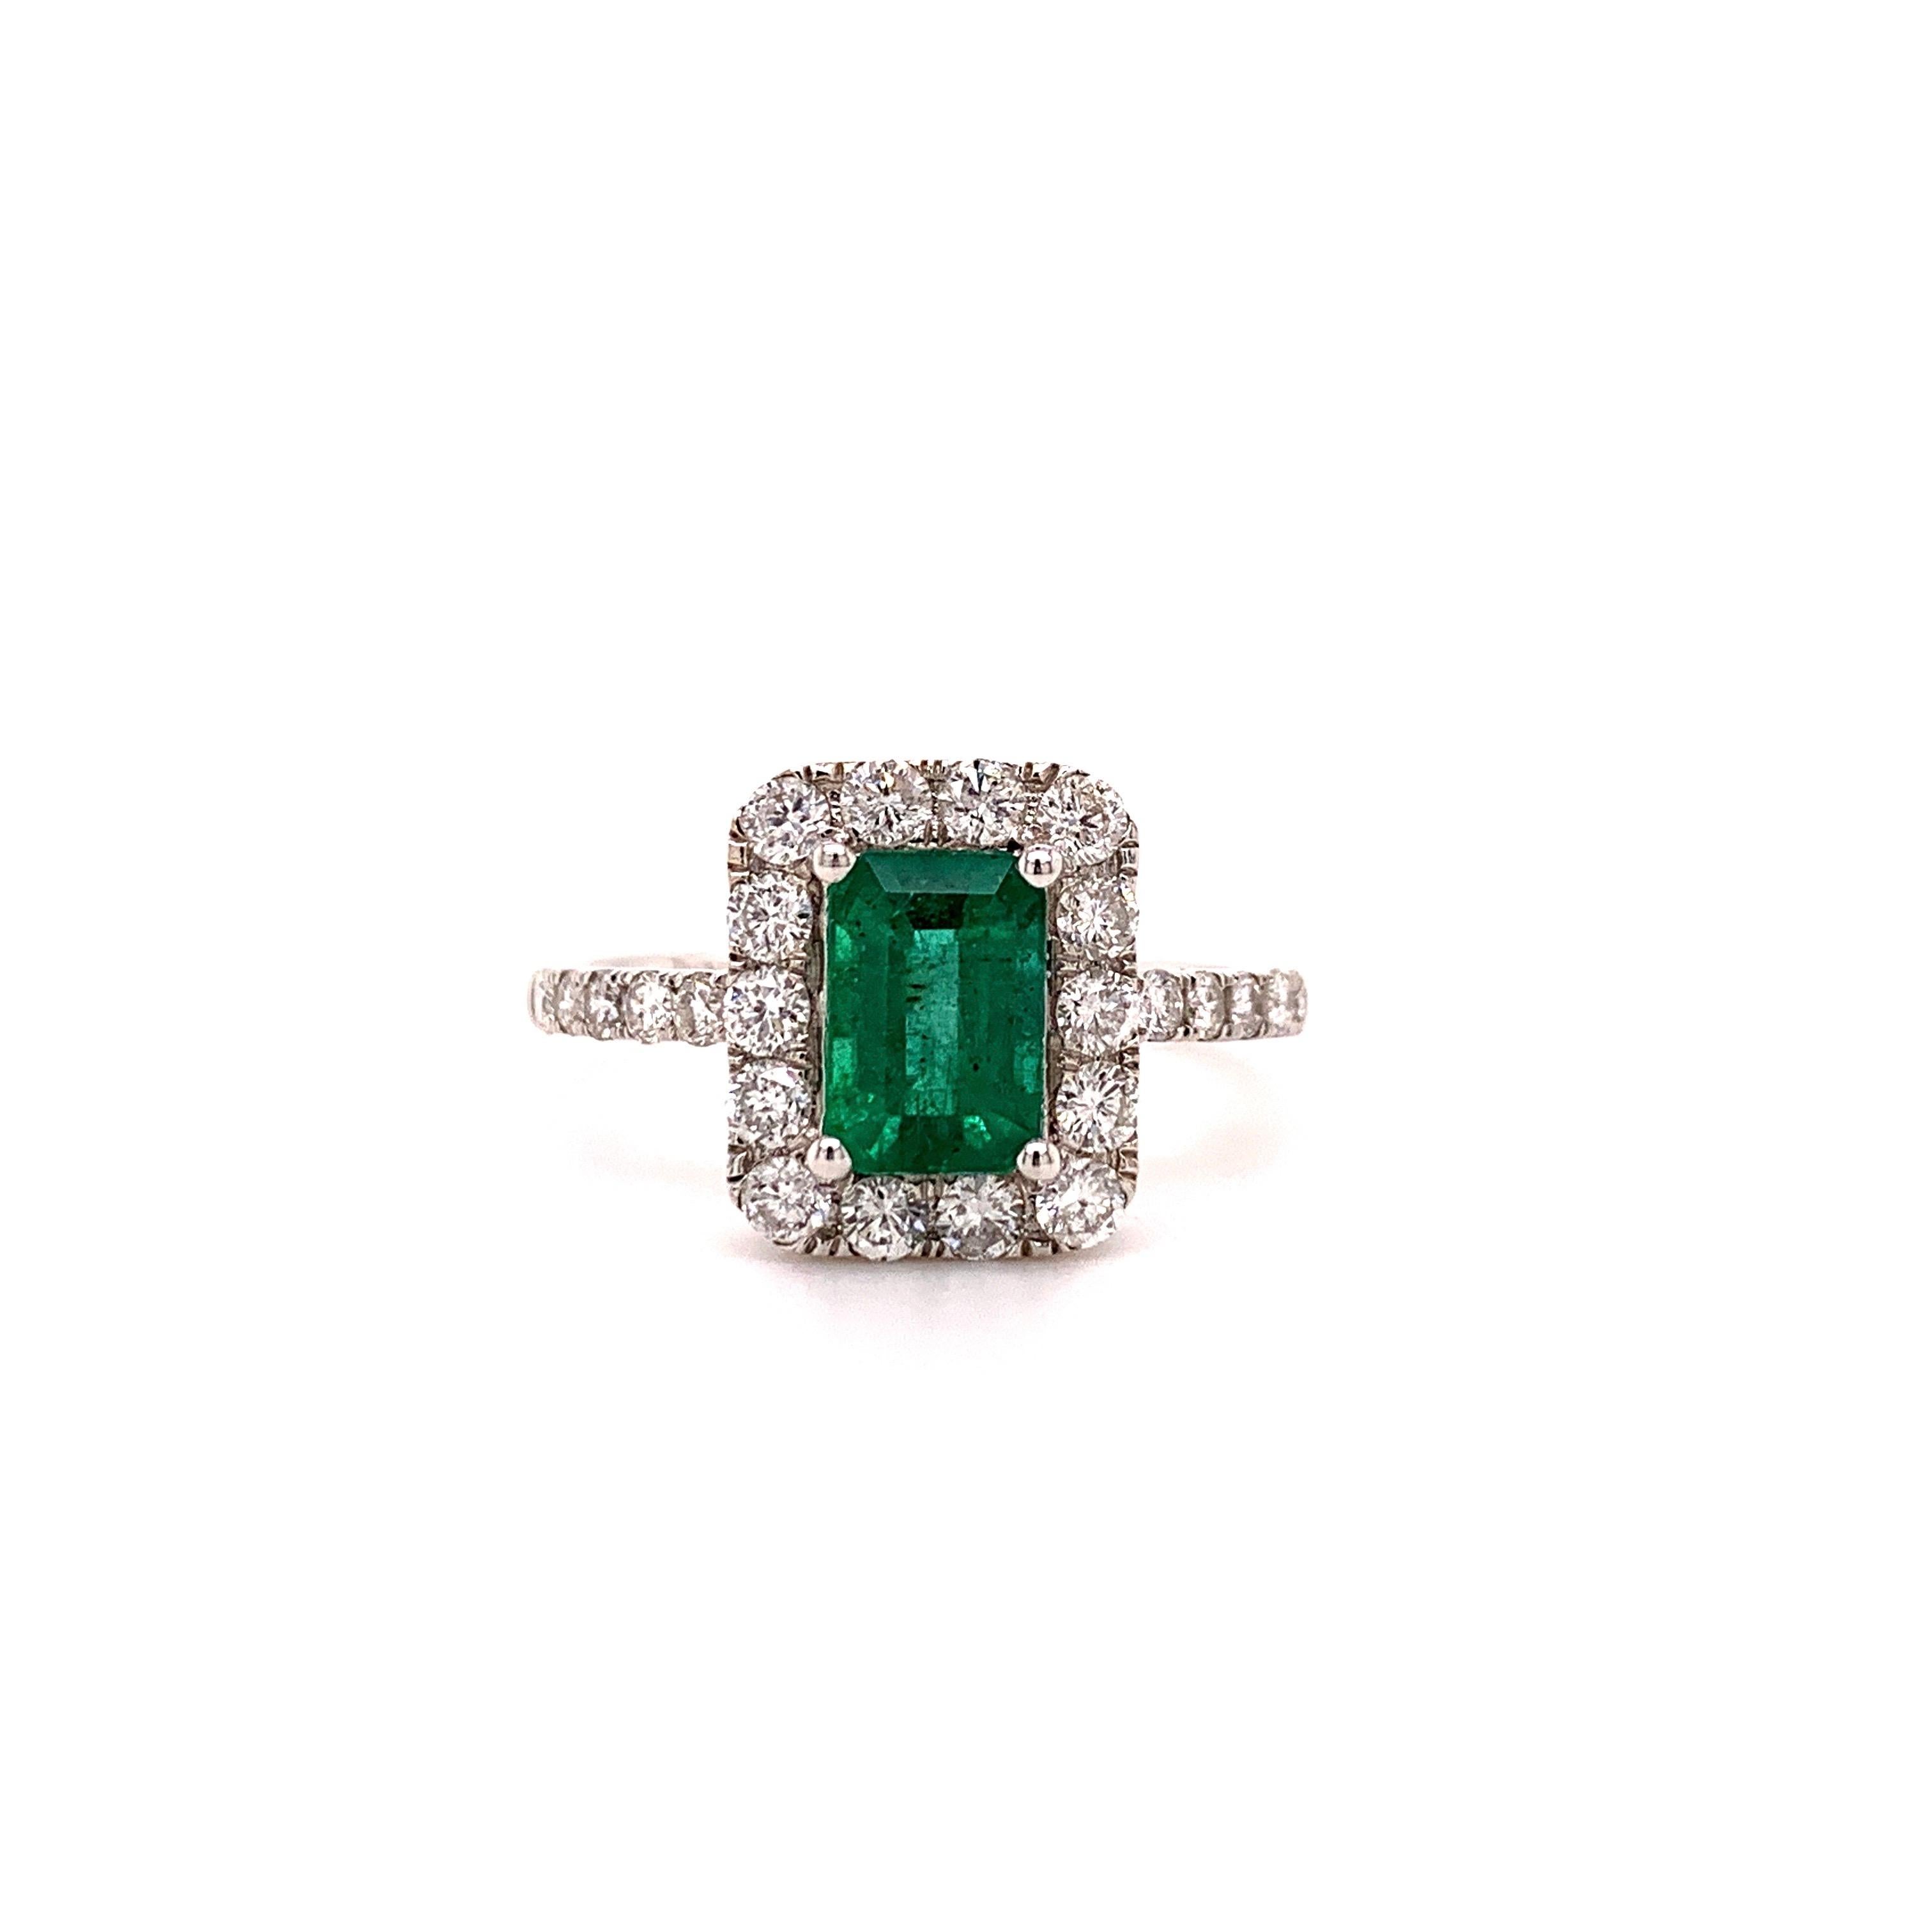 Classic emerald diamond ring. Lively strong bluish-green, good lustre, emerald faceted natural 0.97-carat emerald mounted on high profile open basket with four bead prongs, accented with a round brilliant cut diamond on the frame and shank.